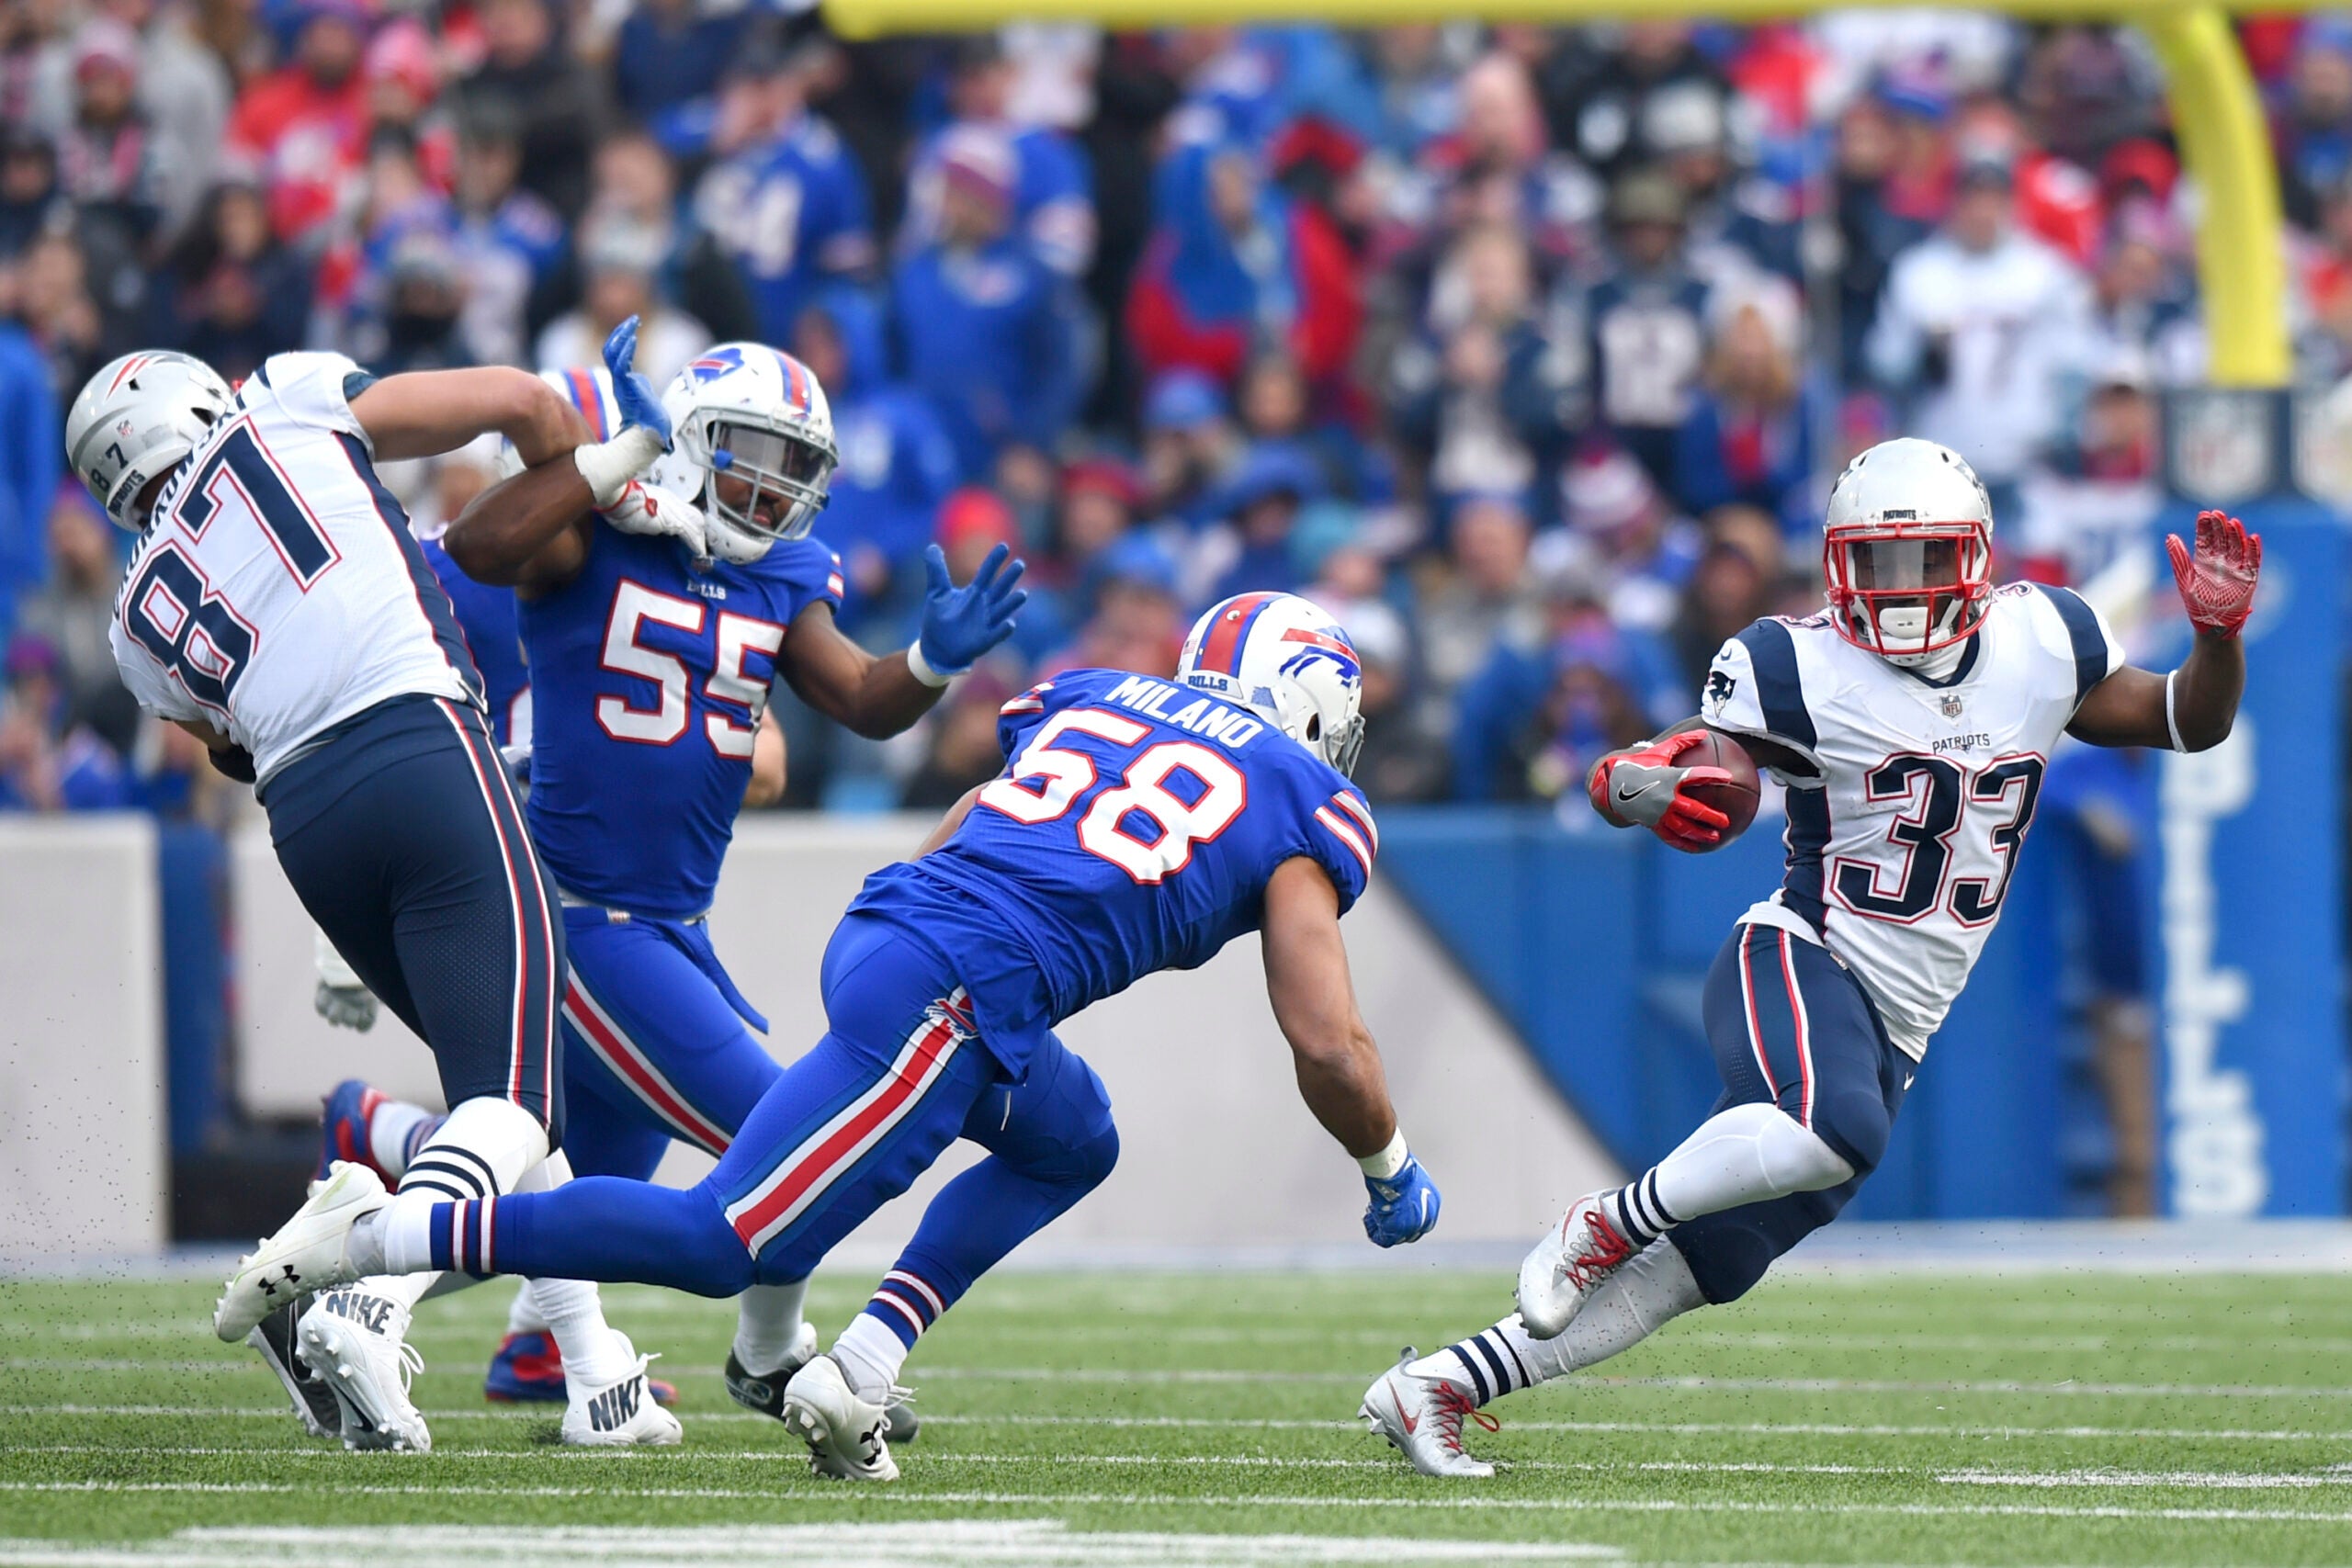 New England Patriots running back Dion Lewis (33) runs with the ball as Buffalo Bills outside linebacker Matt Milano (58) moves in for the tackle during the first half of an NFL football game, Sunday, Dec. 3, 2017, in Orchard Park, N.Y. Patriots' Rob Gronkowski (87) applies a block on Bills' Jerry Hughes (55) on the play.